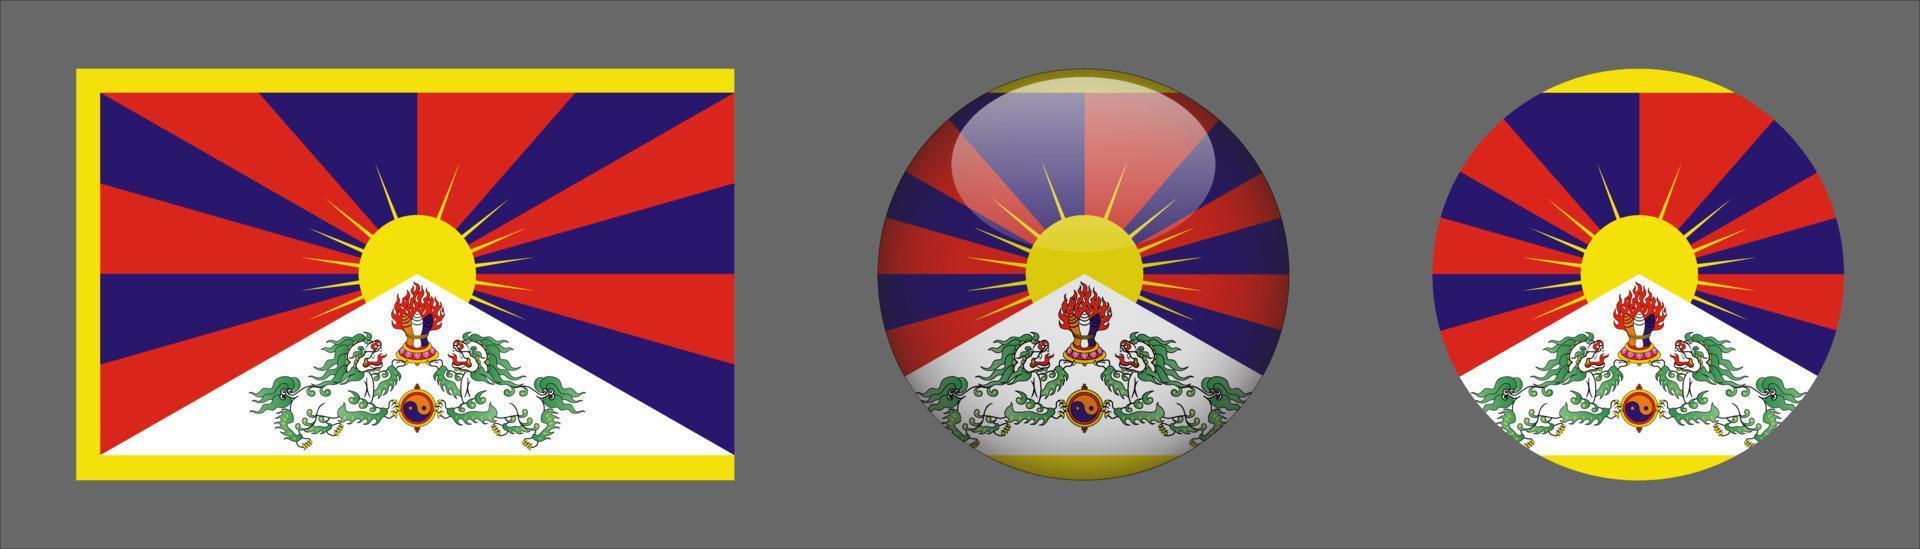 Tibet Flag Set Collection, Original Size Ratio, 3D Rounded and Flat Rounded. vector